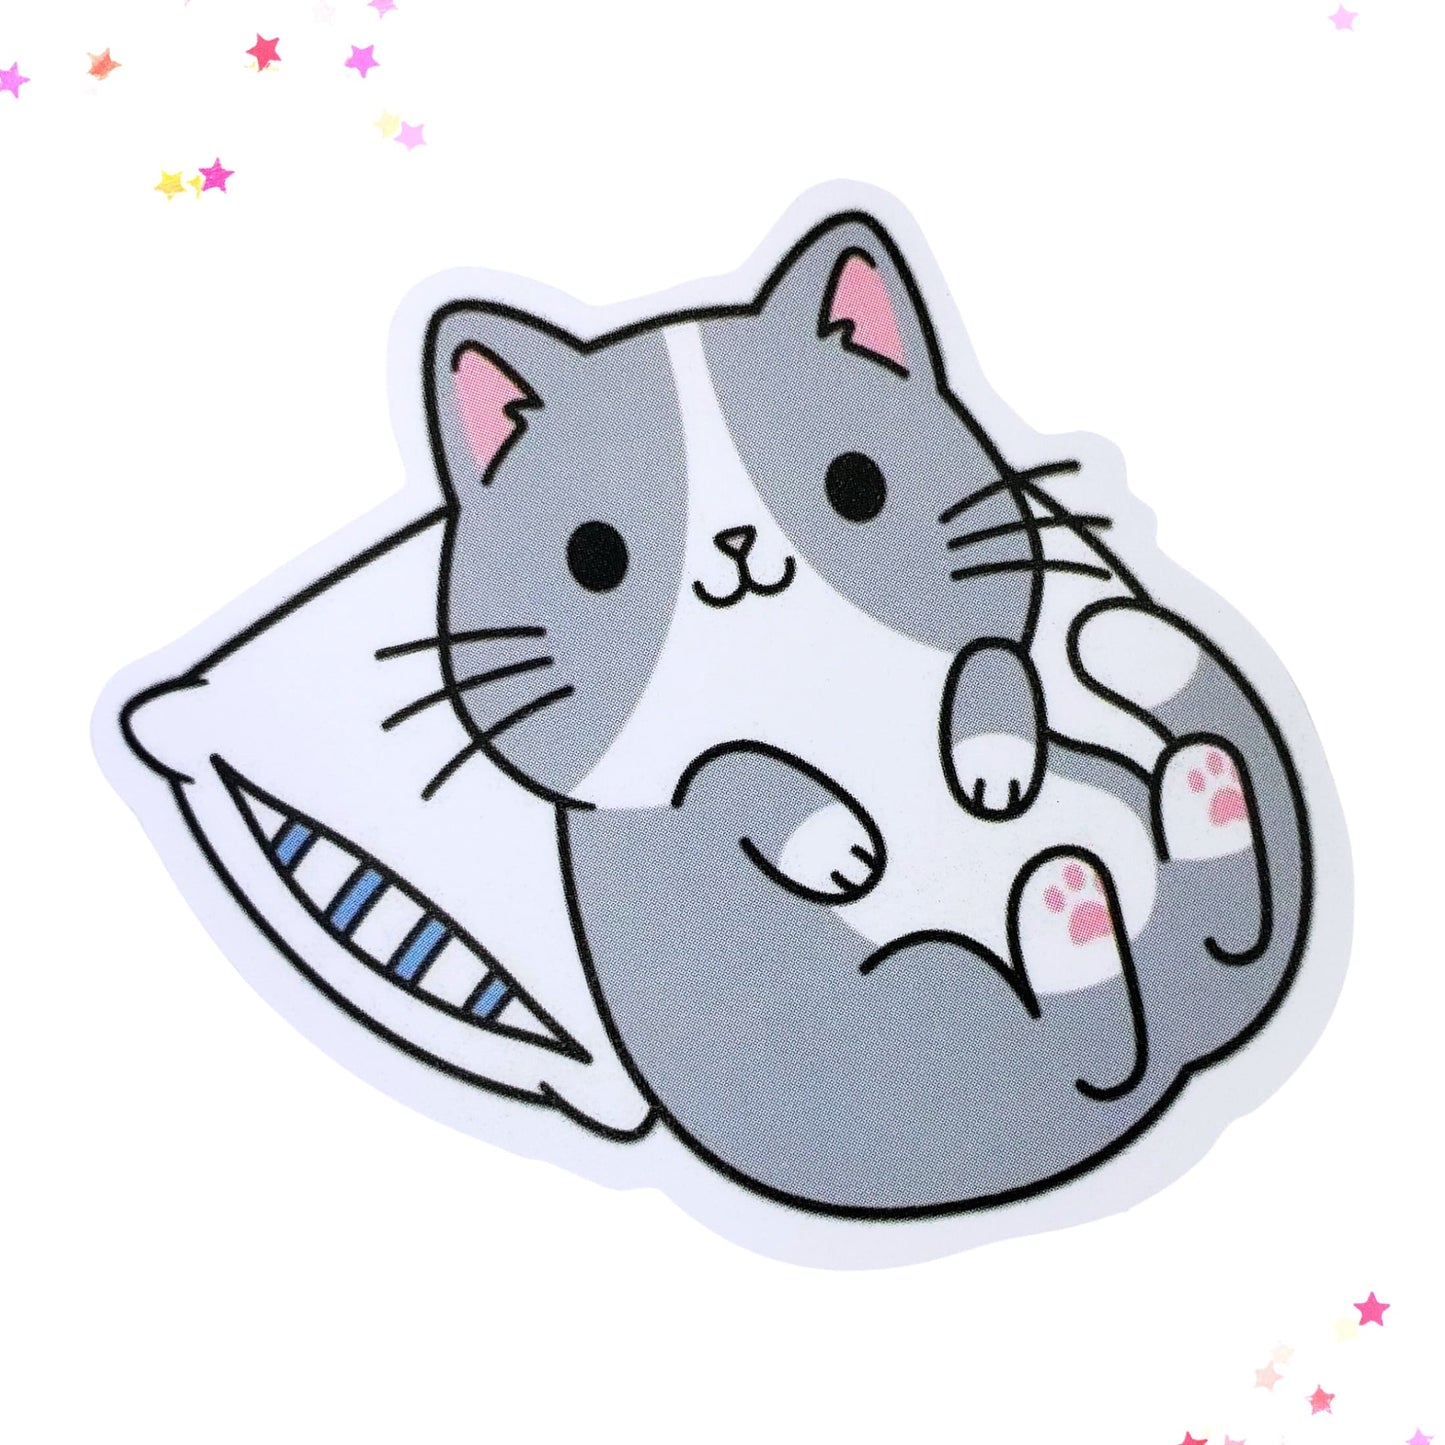 My Pillow Cat Waterproof Sticker from Confetti Kitty, Only 1.00